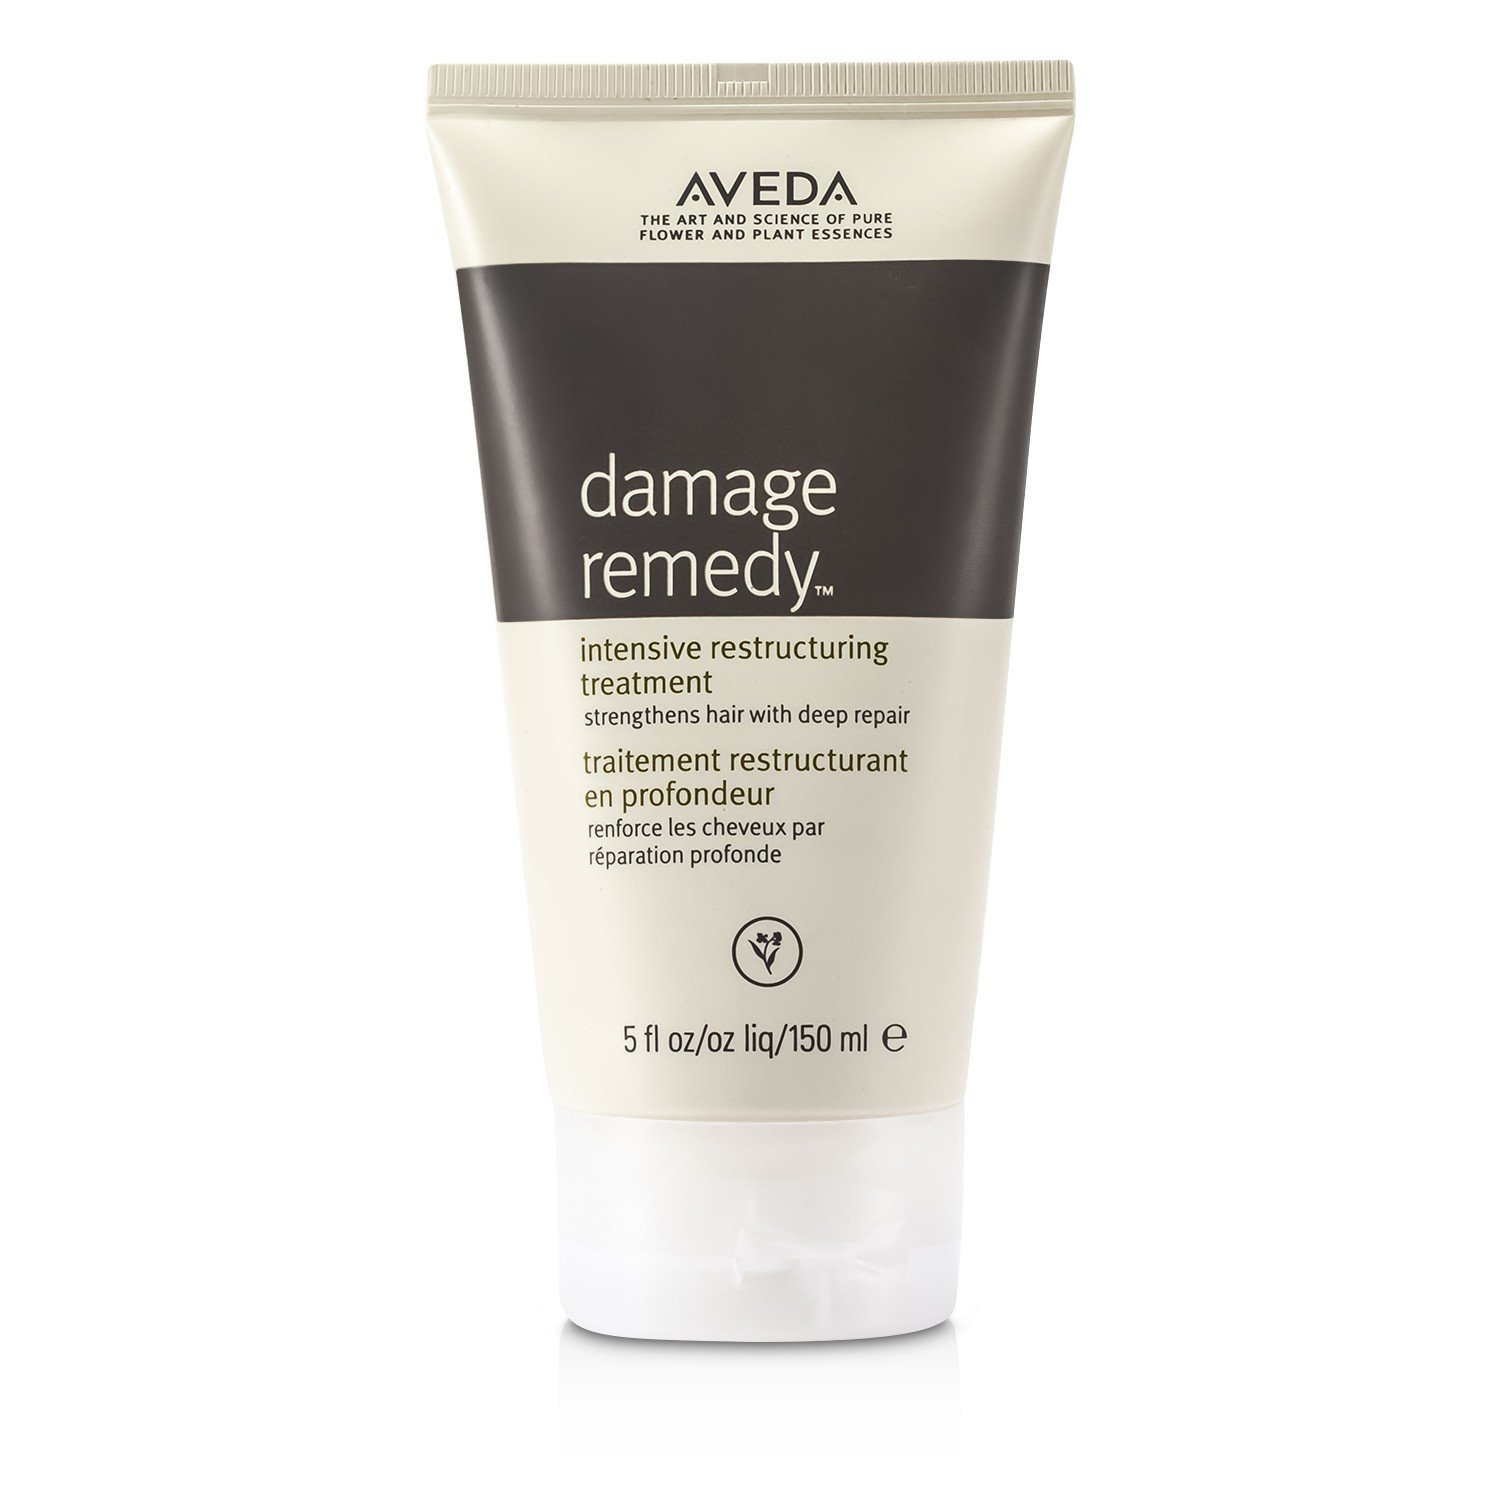 Aveda Hair Care Treatment Intensive Rest Ructu Ring Treatment 150 ml